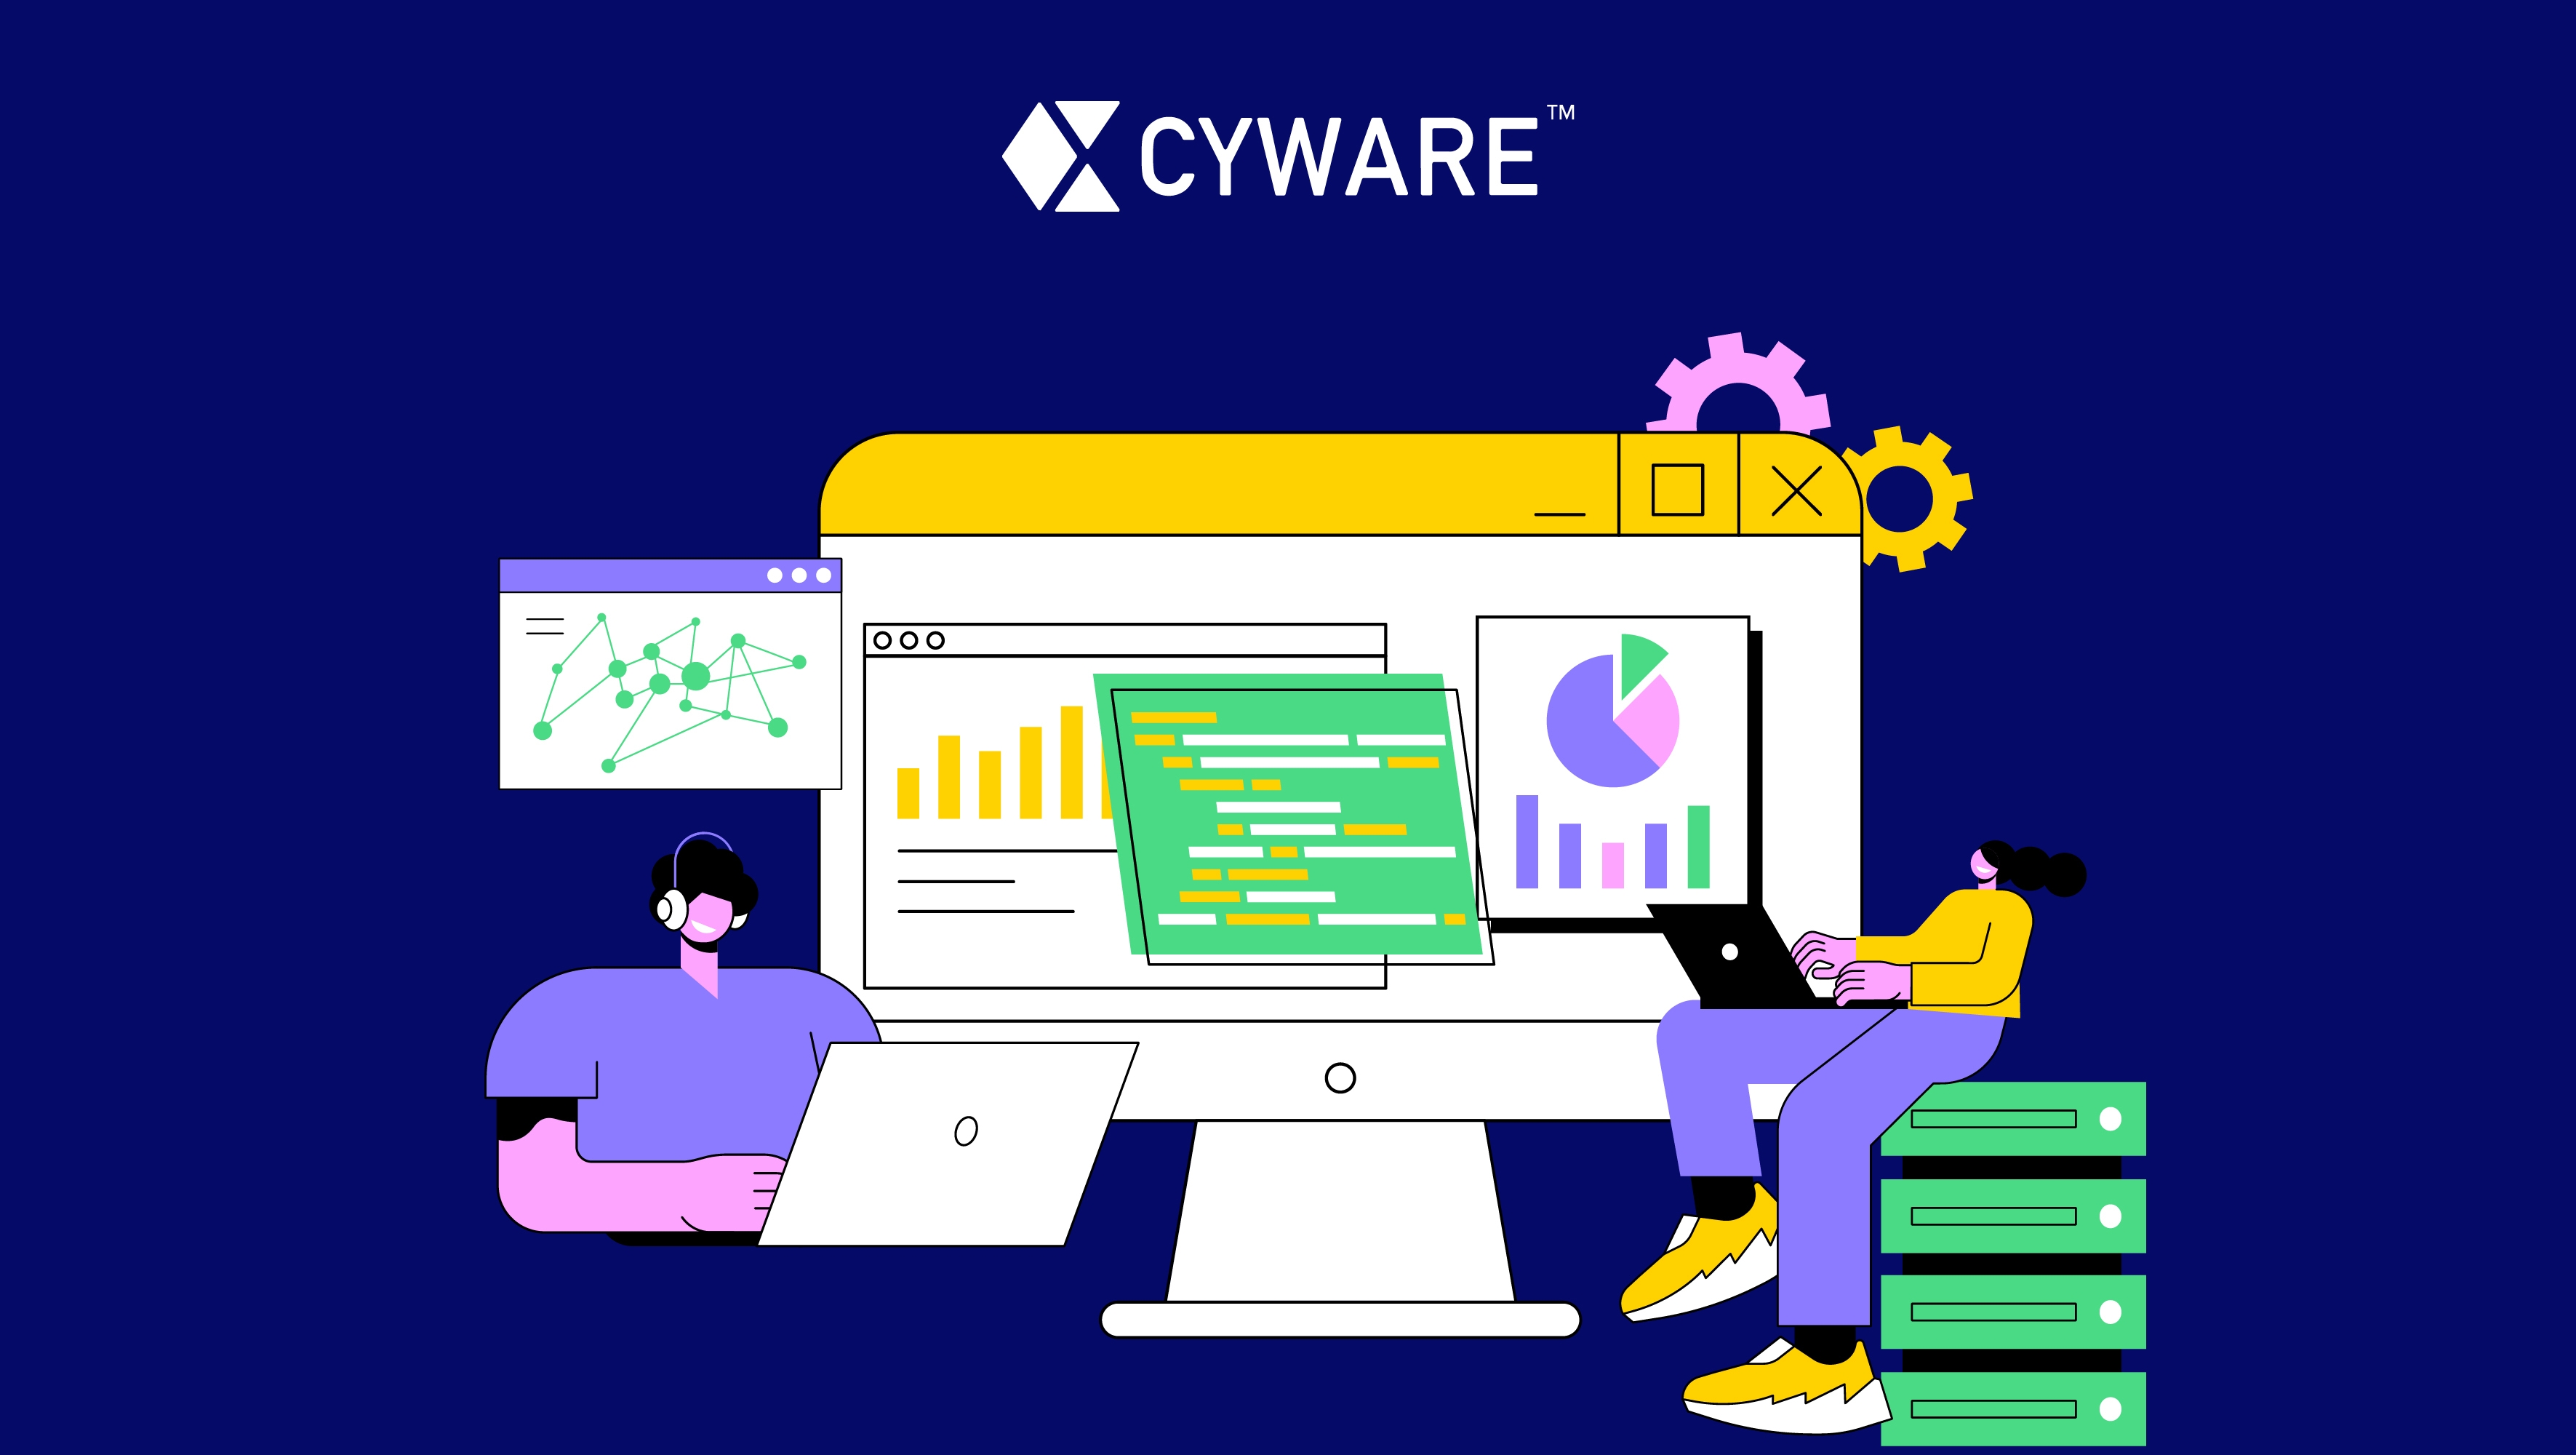 Gain 360-Degree Insights into Threat Data with Cyware’s Revamped Threat Data Capabilities